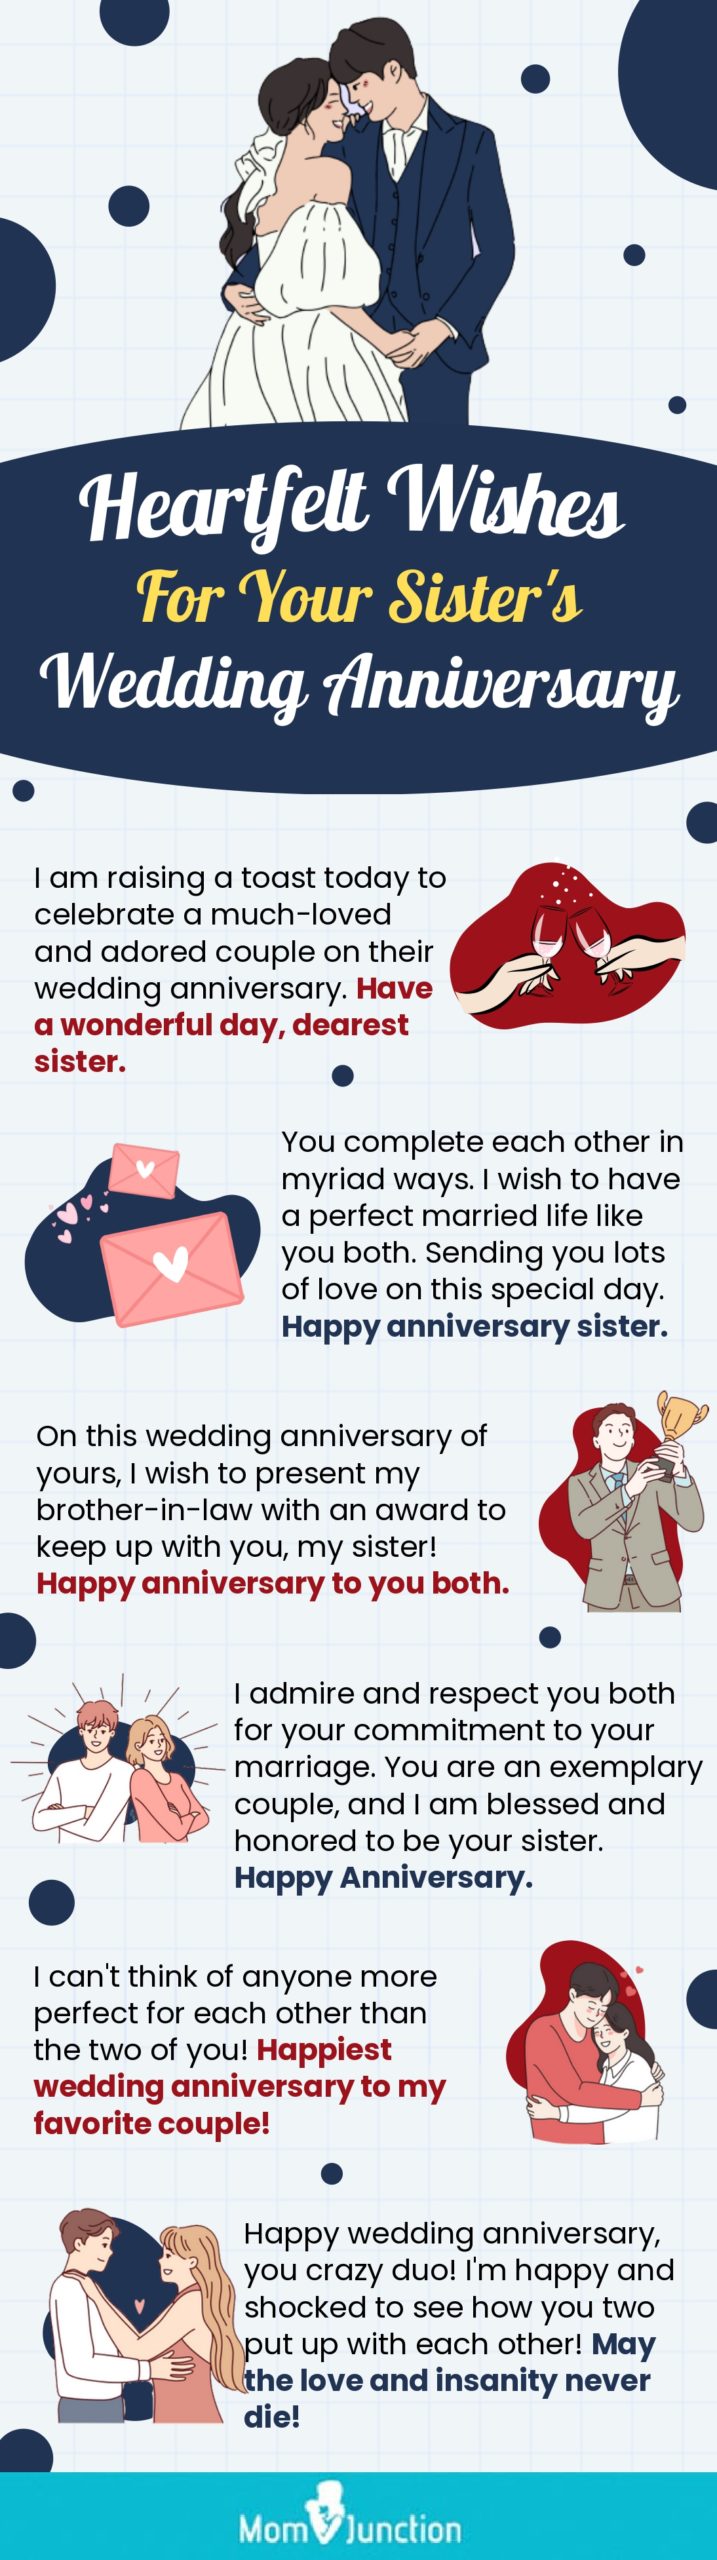 150+ Happy Wedding Anniversary Wishes, Messages & Quotes  Happy wedding  anniversary wishes, Happy wedding anniversary quotes, Happy anniversary  wishes